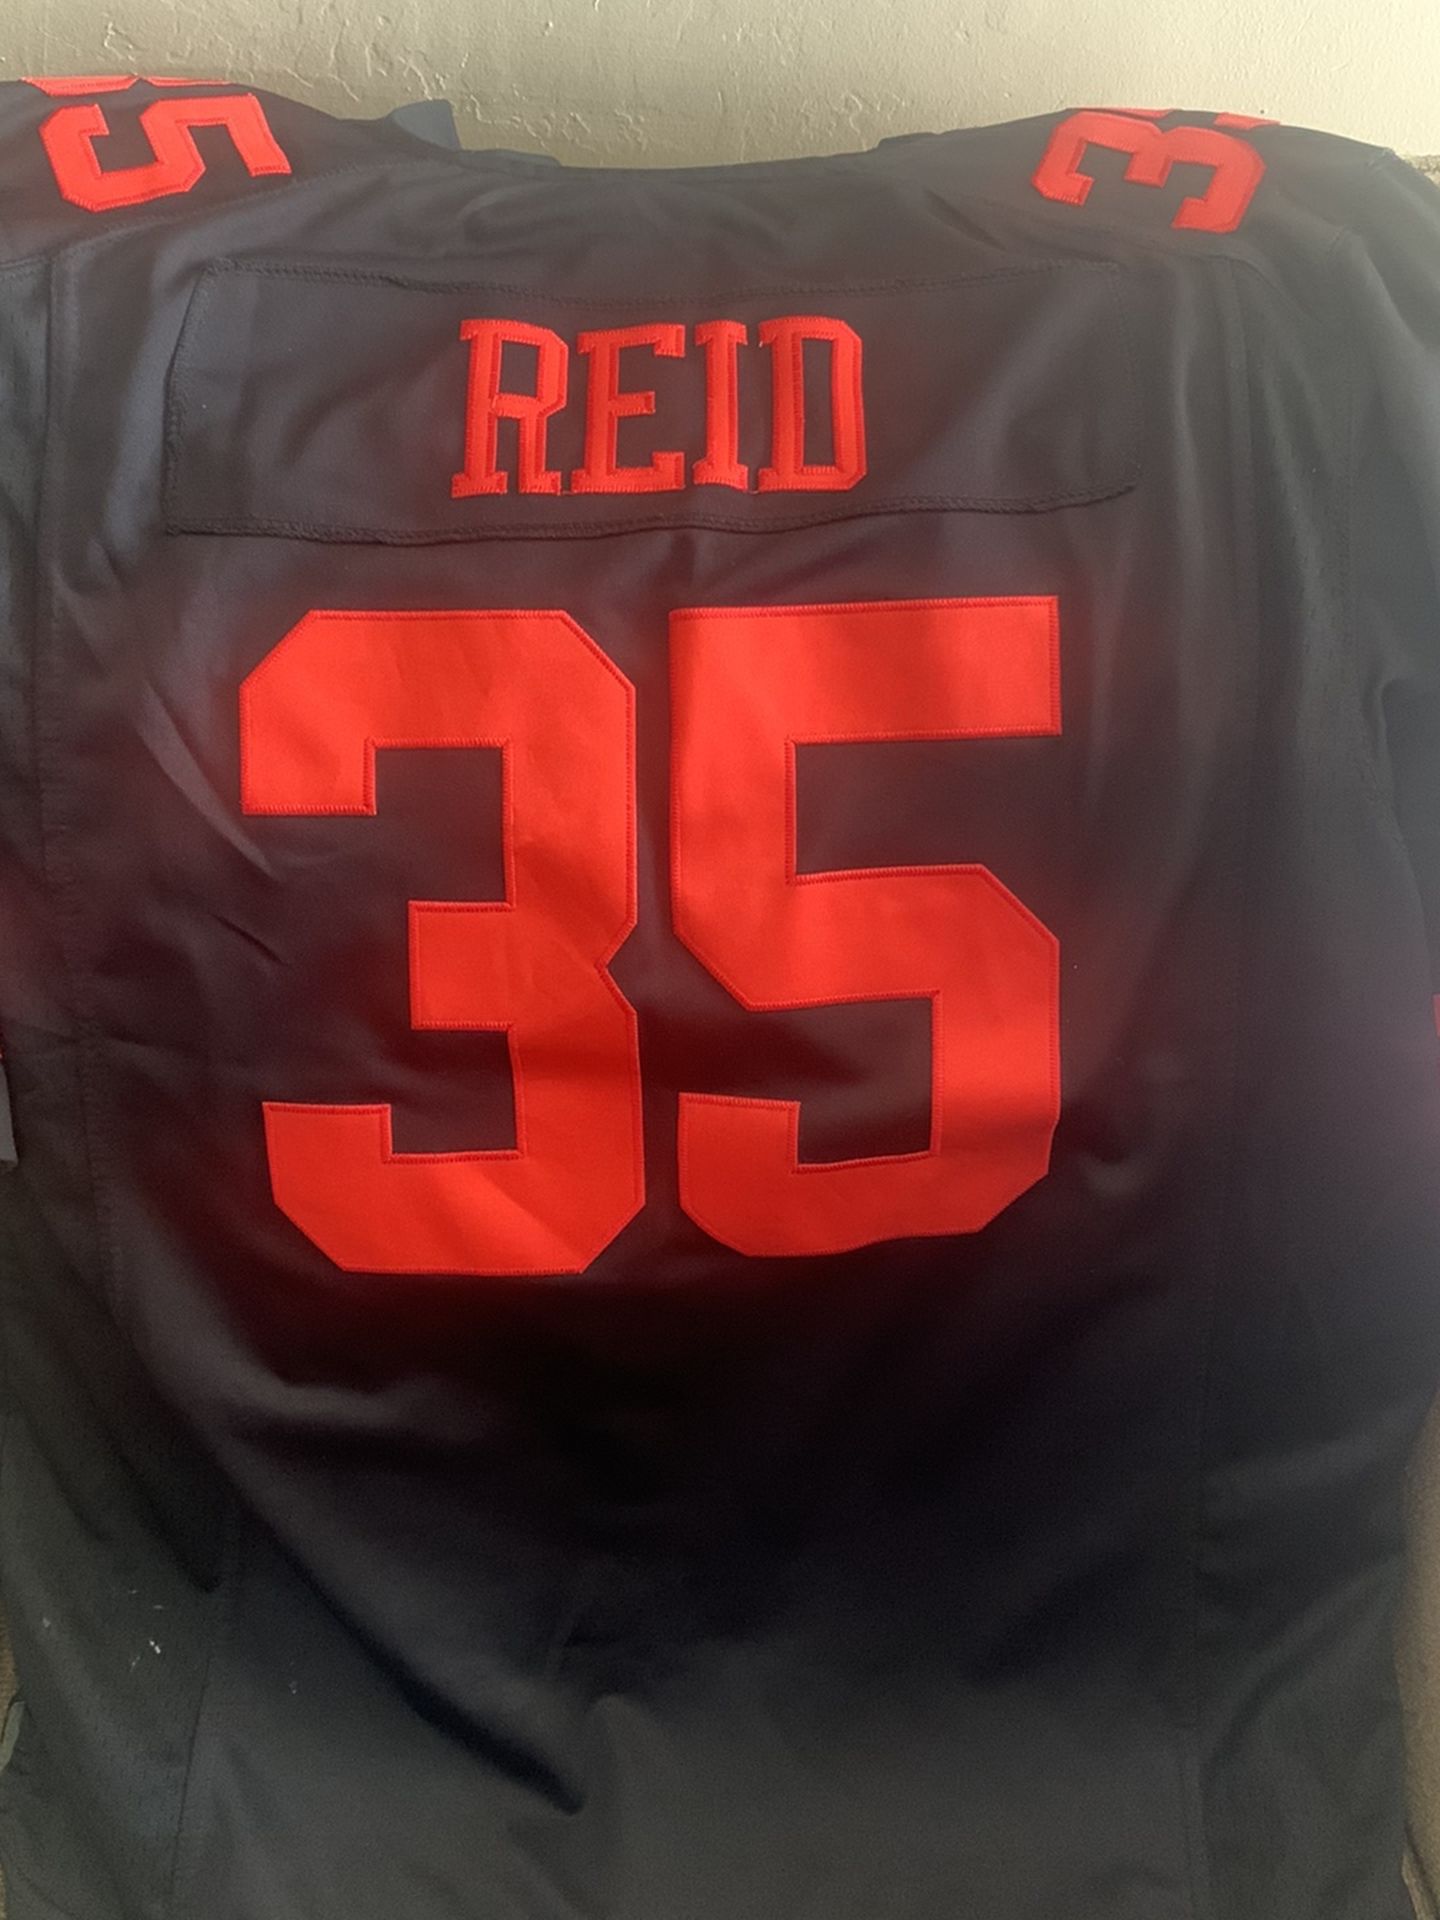 49ers Jersey